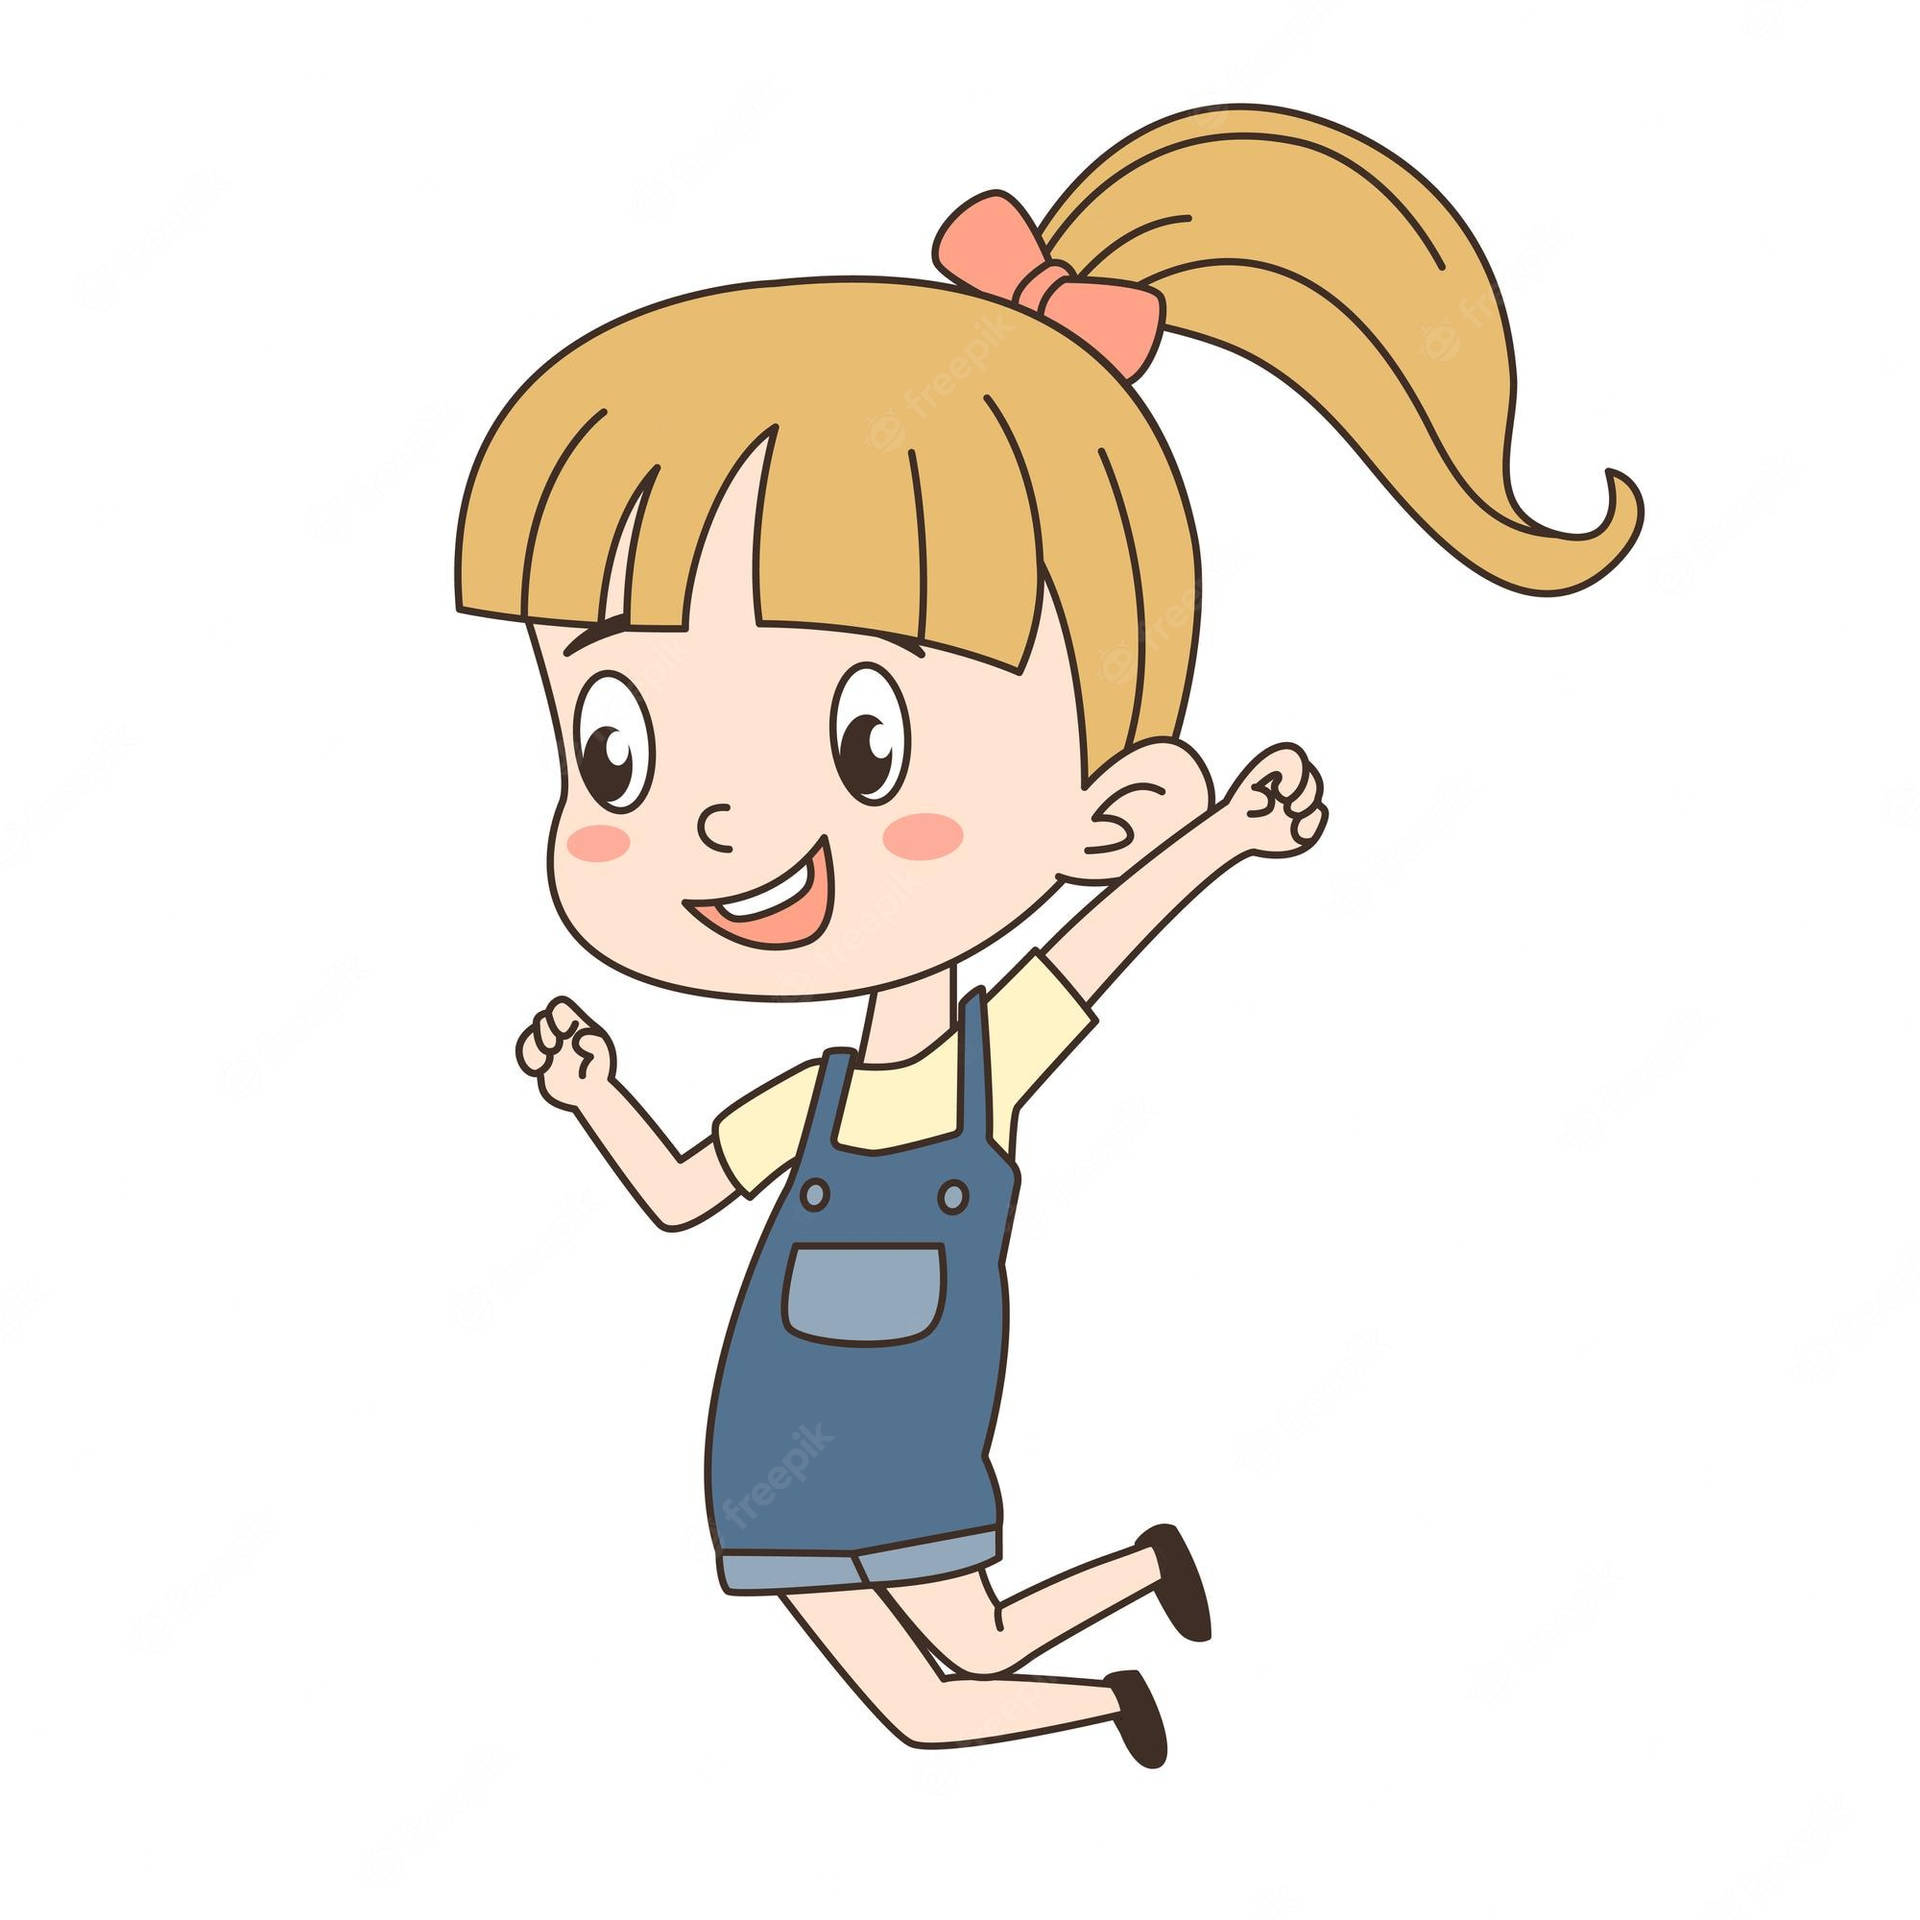 Download Excited Girl In Ponytail Wallpaper | Wallpapers.com